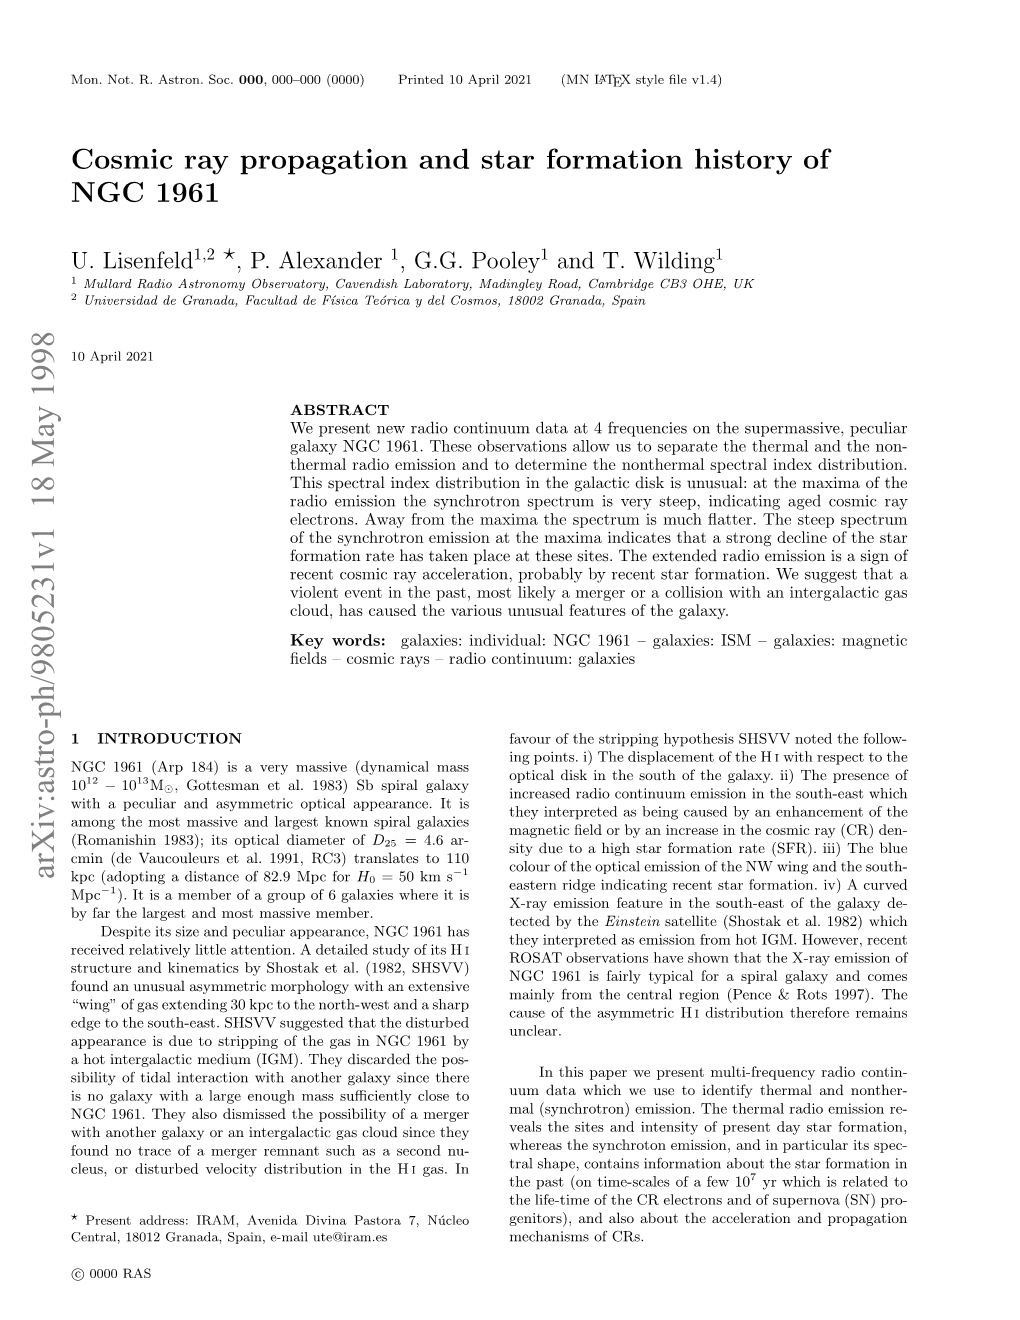 Cosmic Ray Propagation and Star Formation History of NGC 1961 3